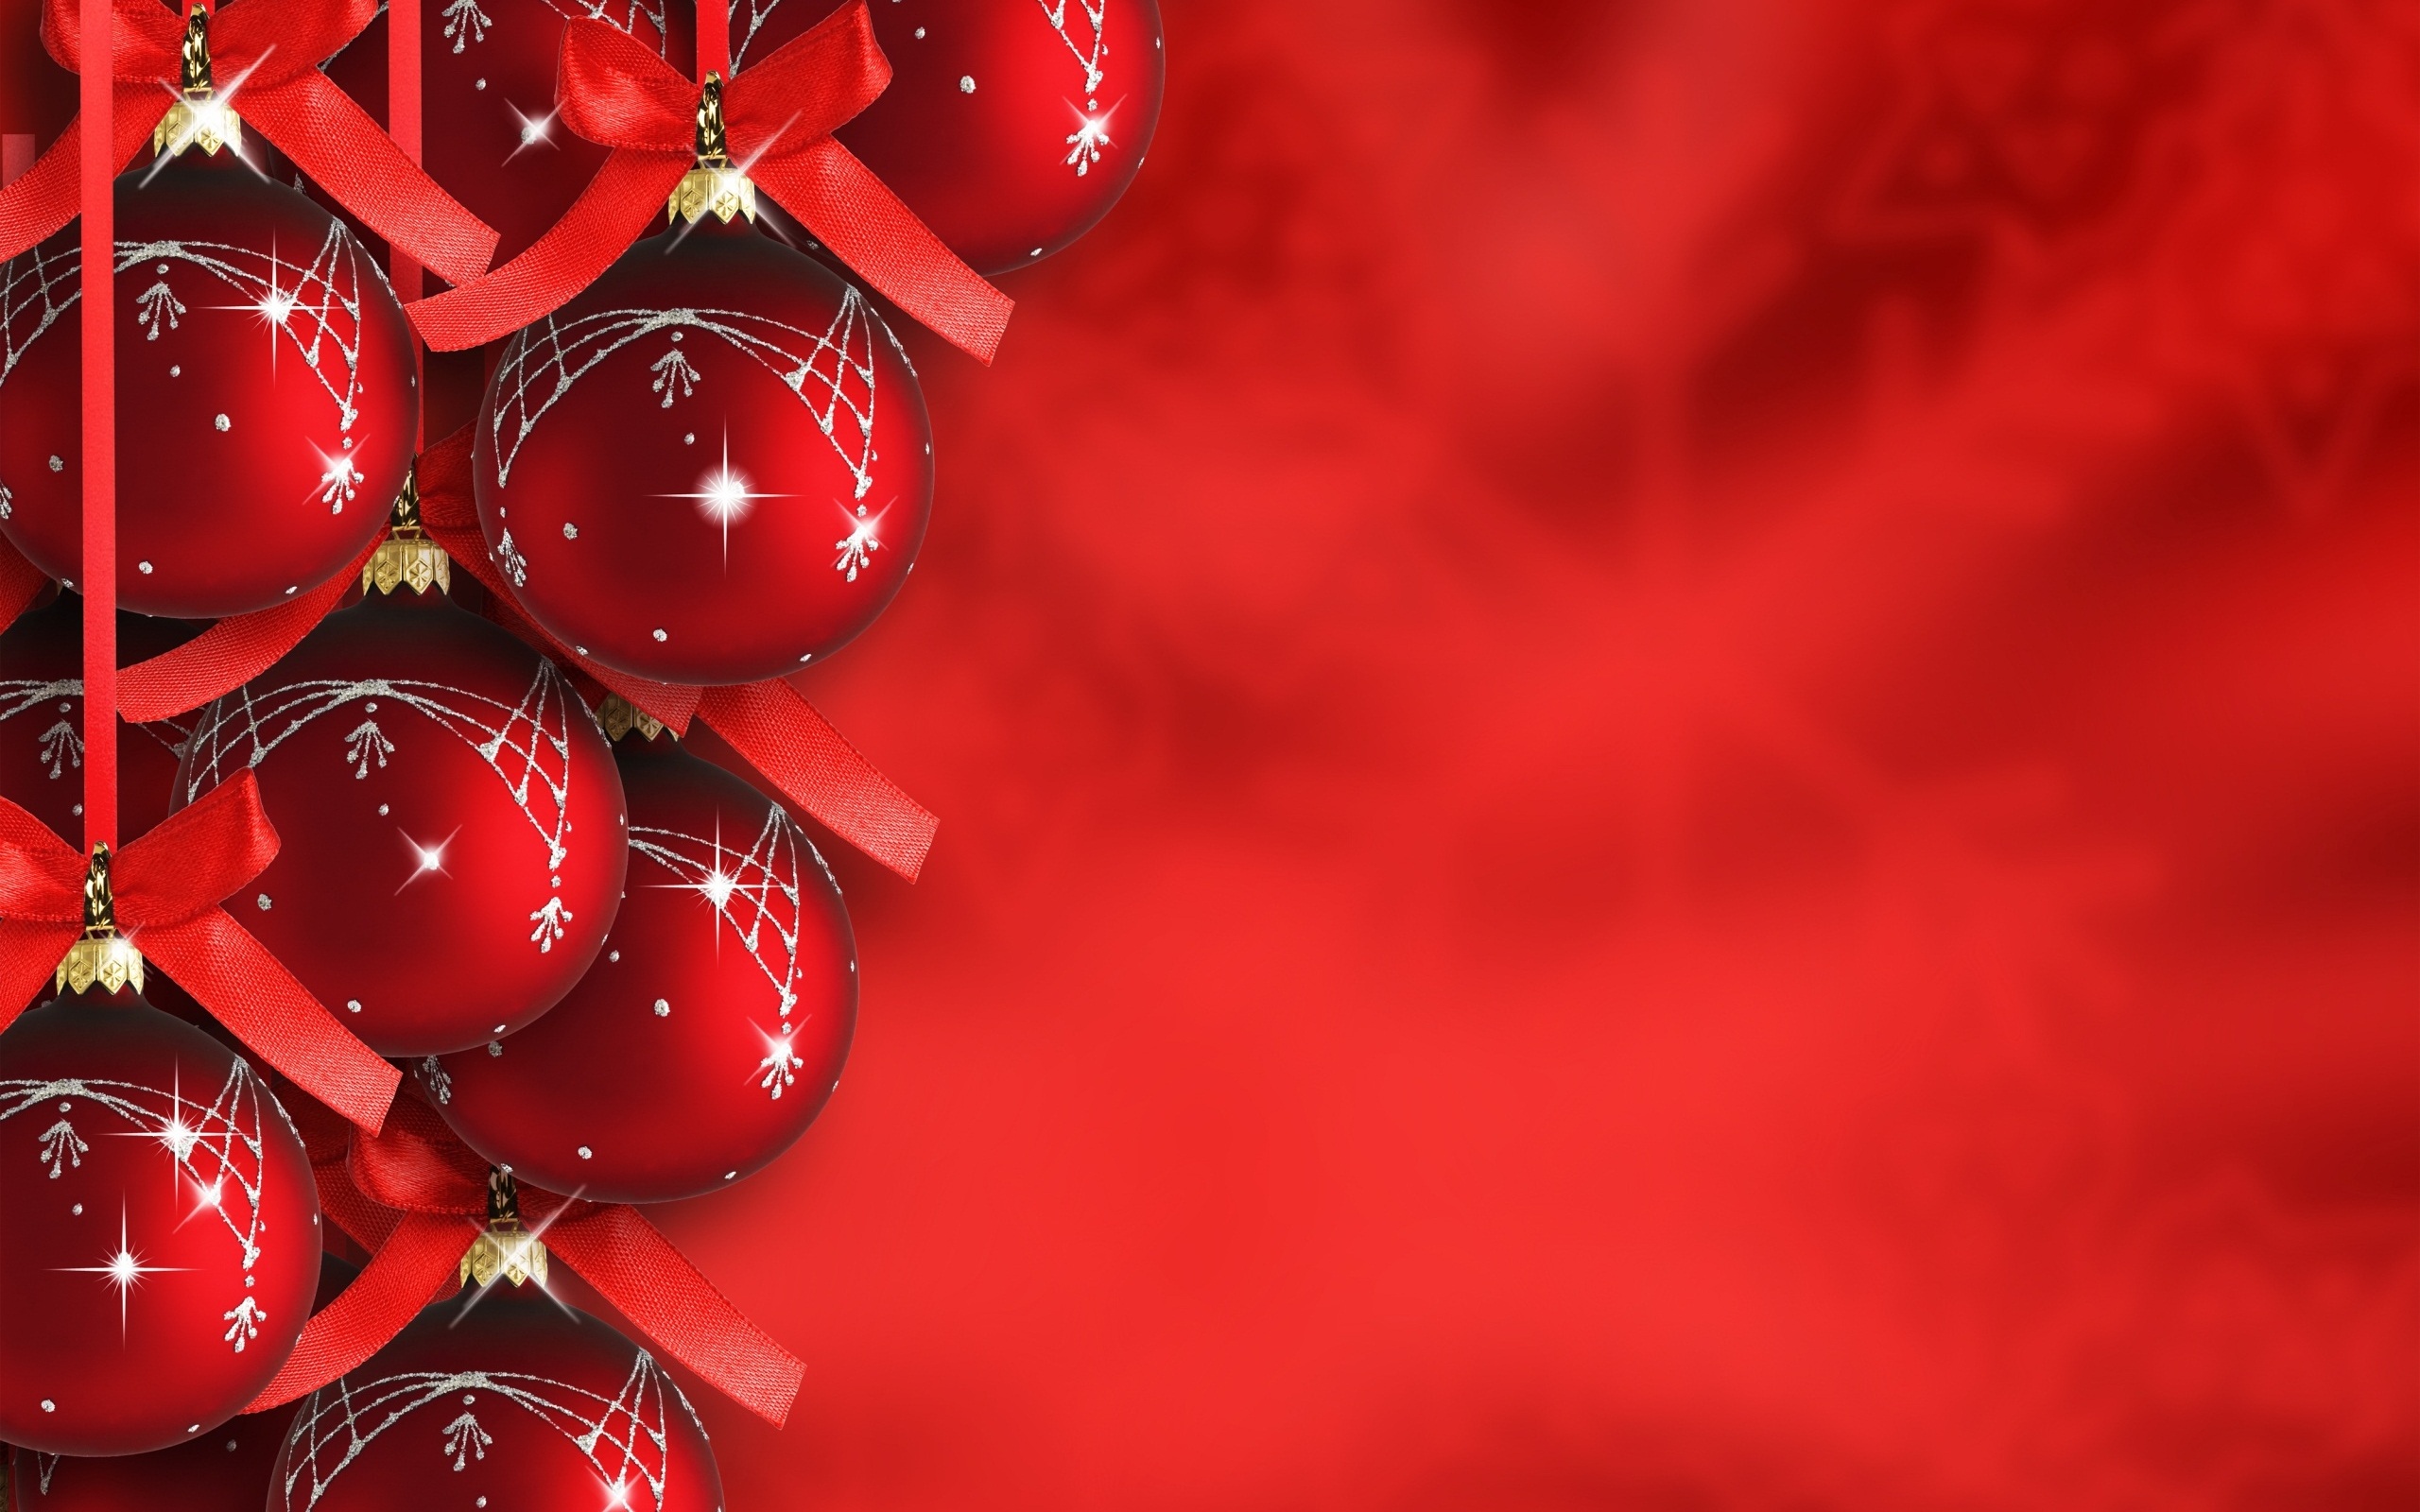 Christmas Background Wallpaper Wallpapers9